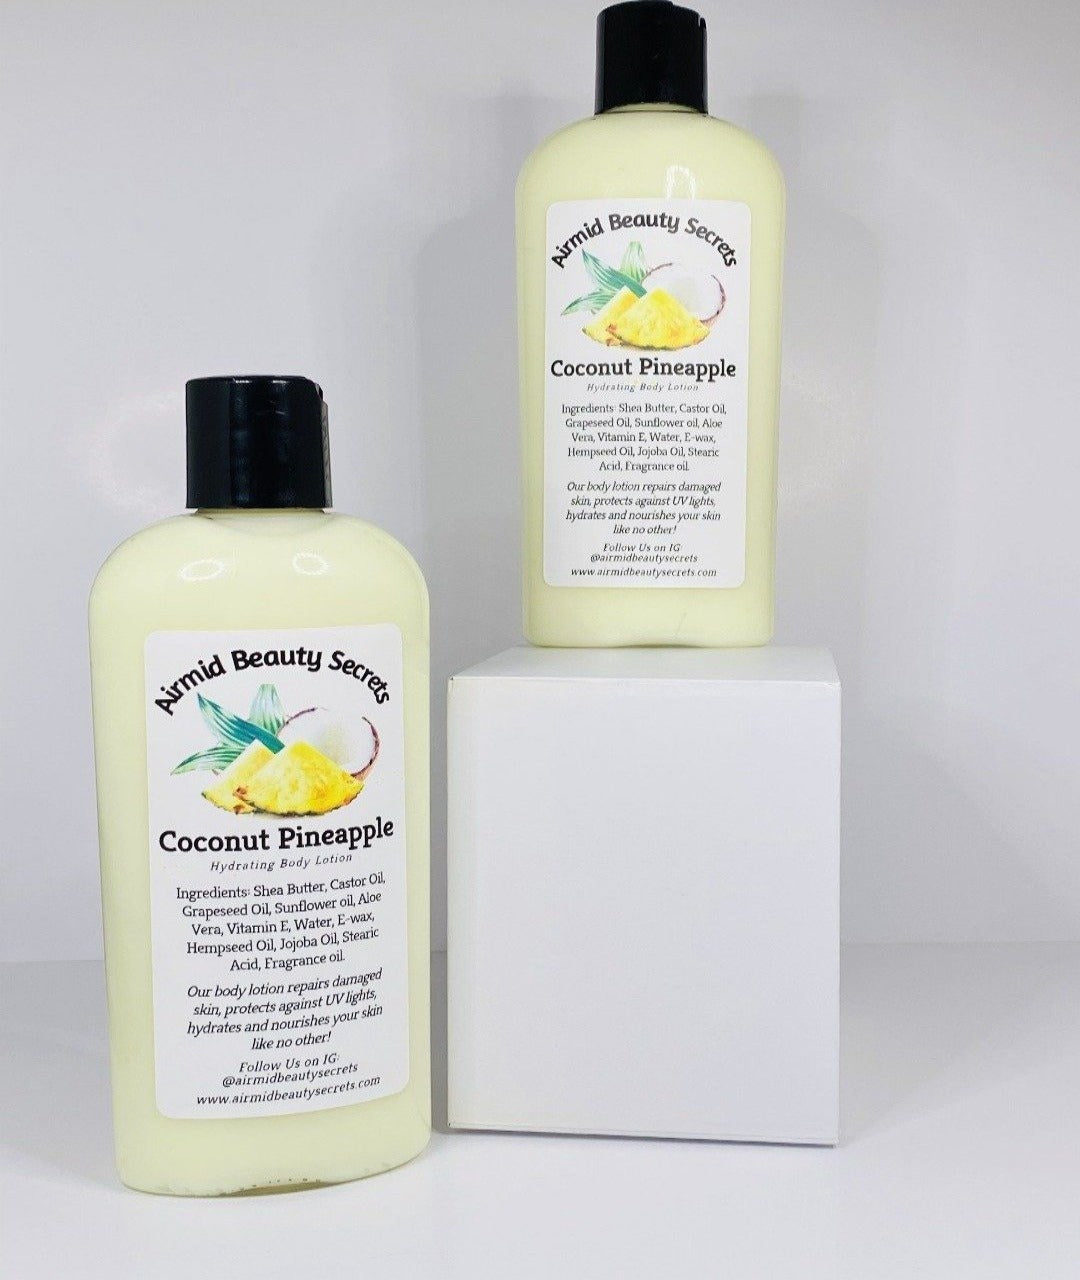 Coconut Pineapple Body Lotion